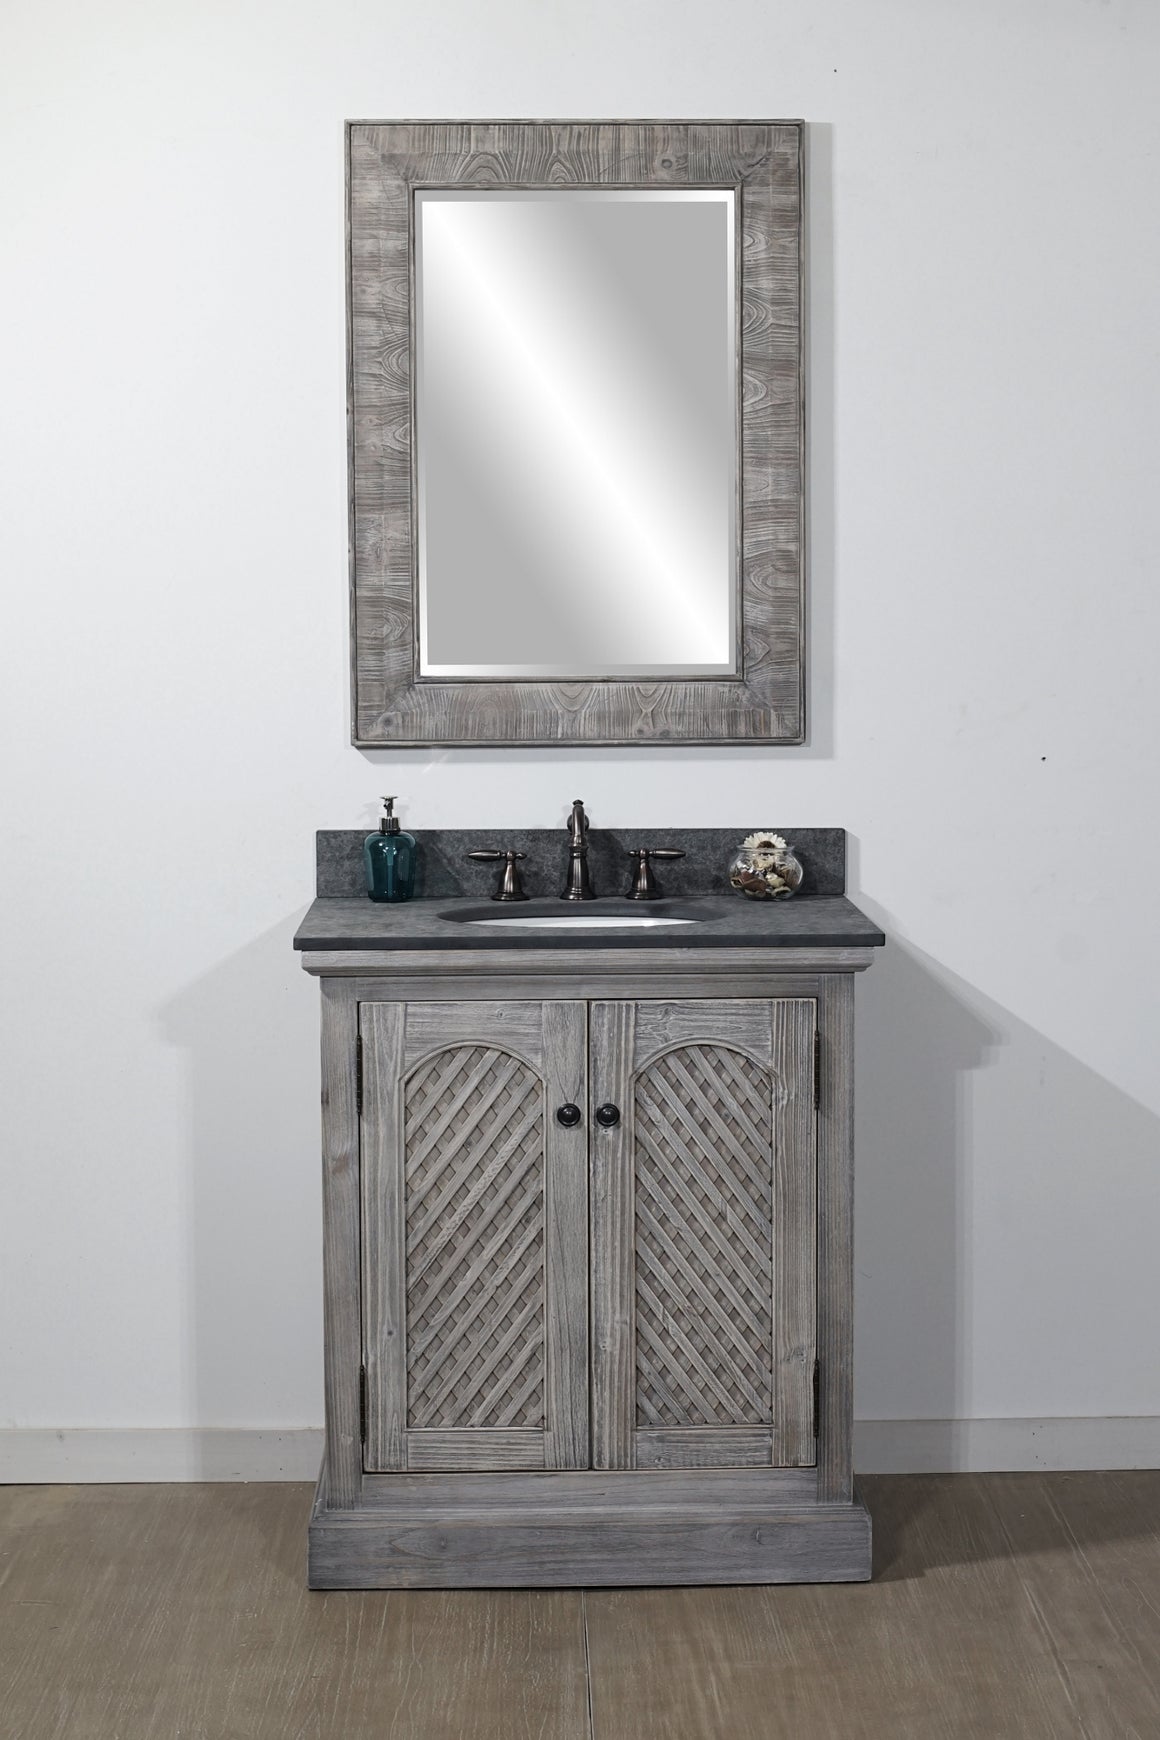 30" RUSTIC SOLID FIR SINK VANITY IN GREY DRIFTWOOD WITH POLISHED TEXTURED SURFACE GRANITE TOP-NO FAUCET